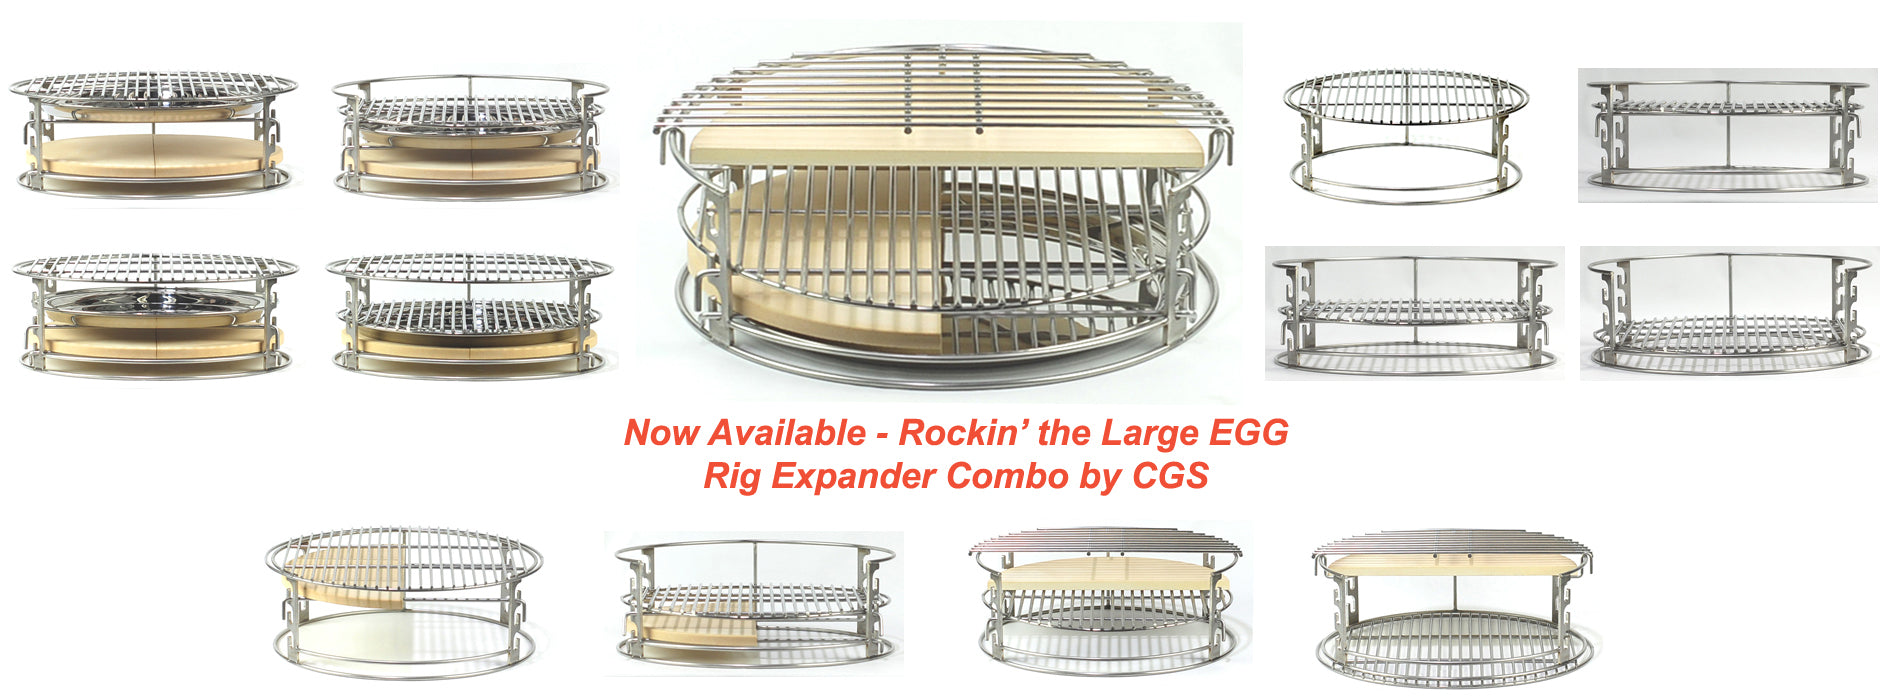 All Big Green Egg Cast Iron Grids, Perfect Grill Marks Every Time — Ceramic  Grill Store